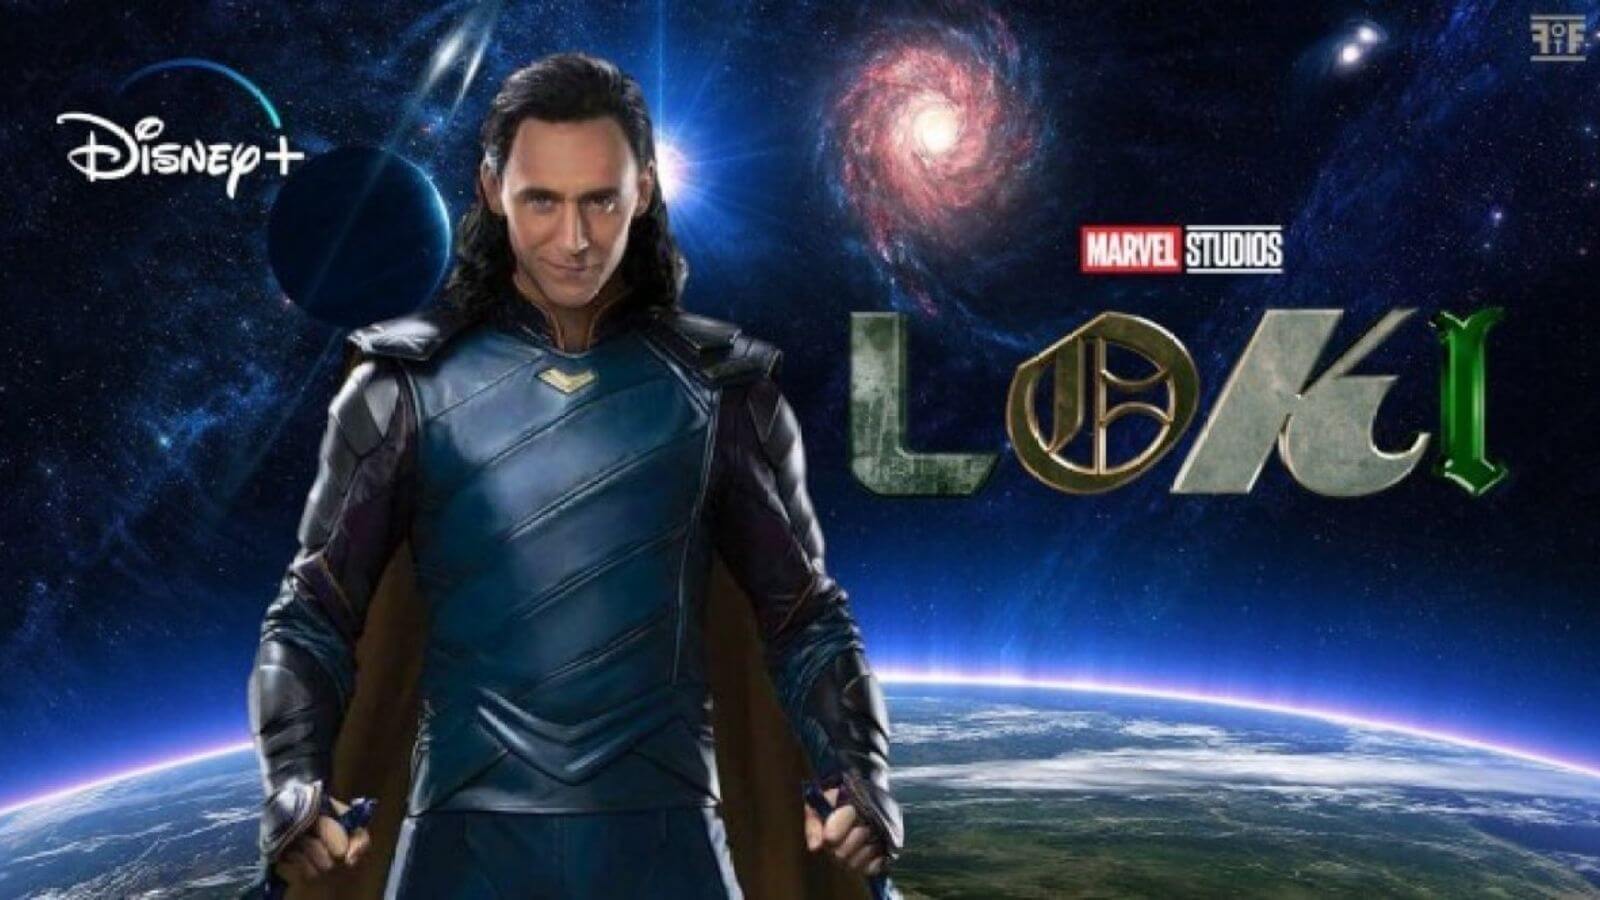 What Should Fans Expect in “Loki”?